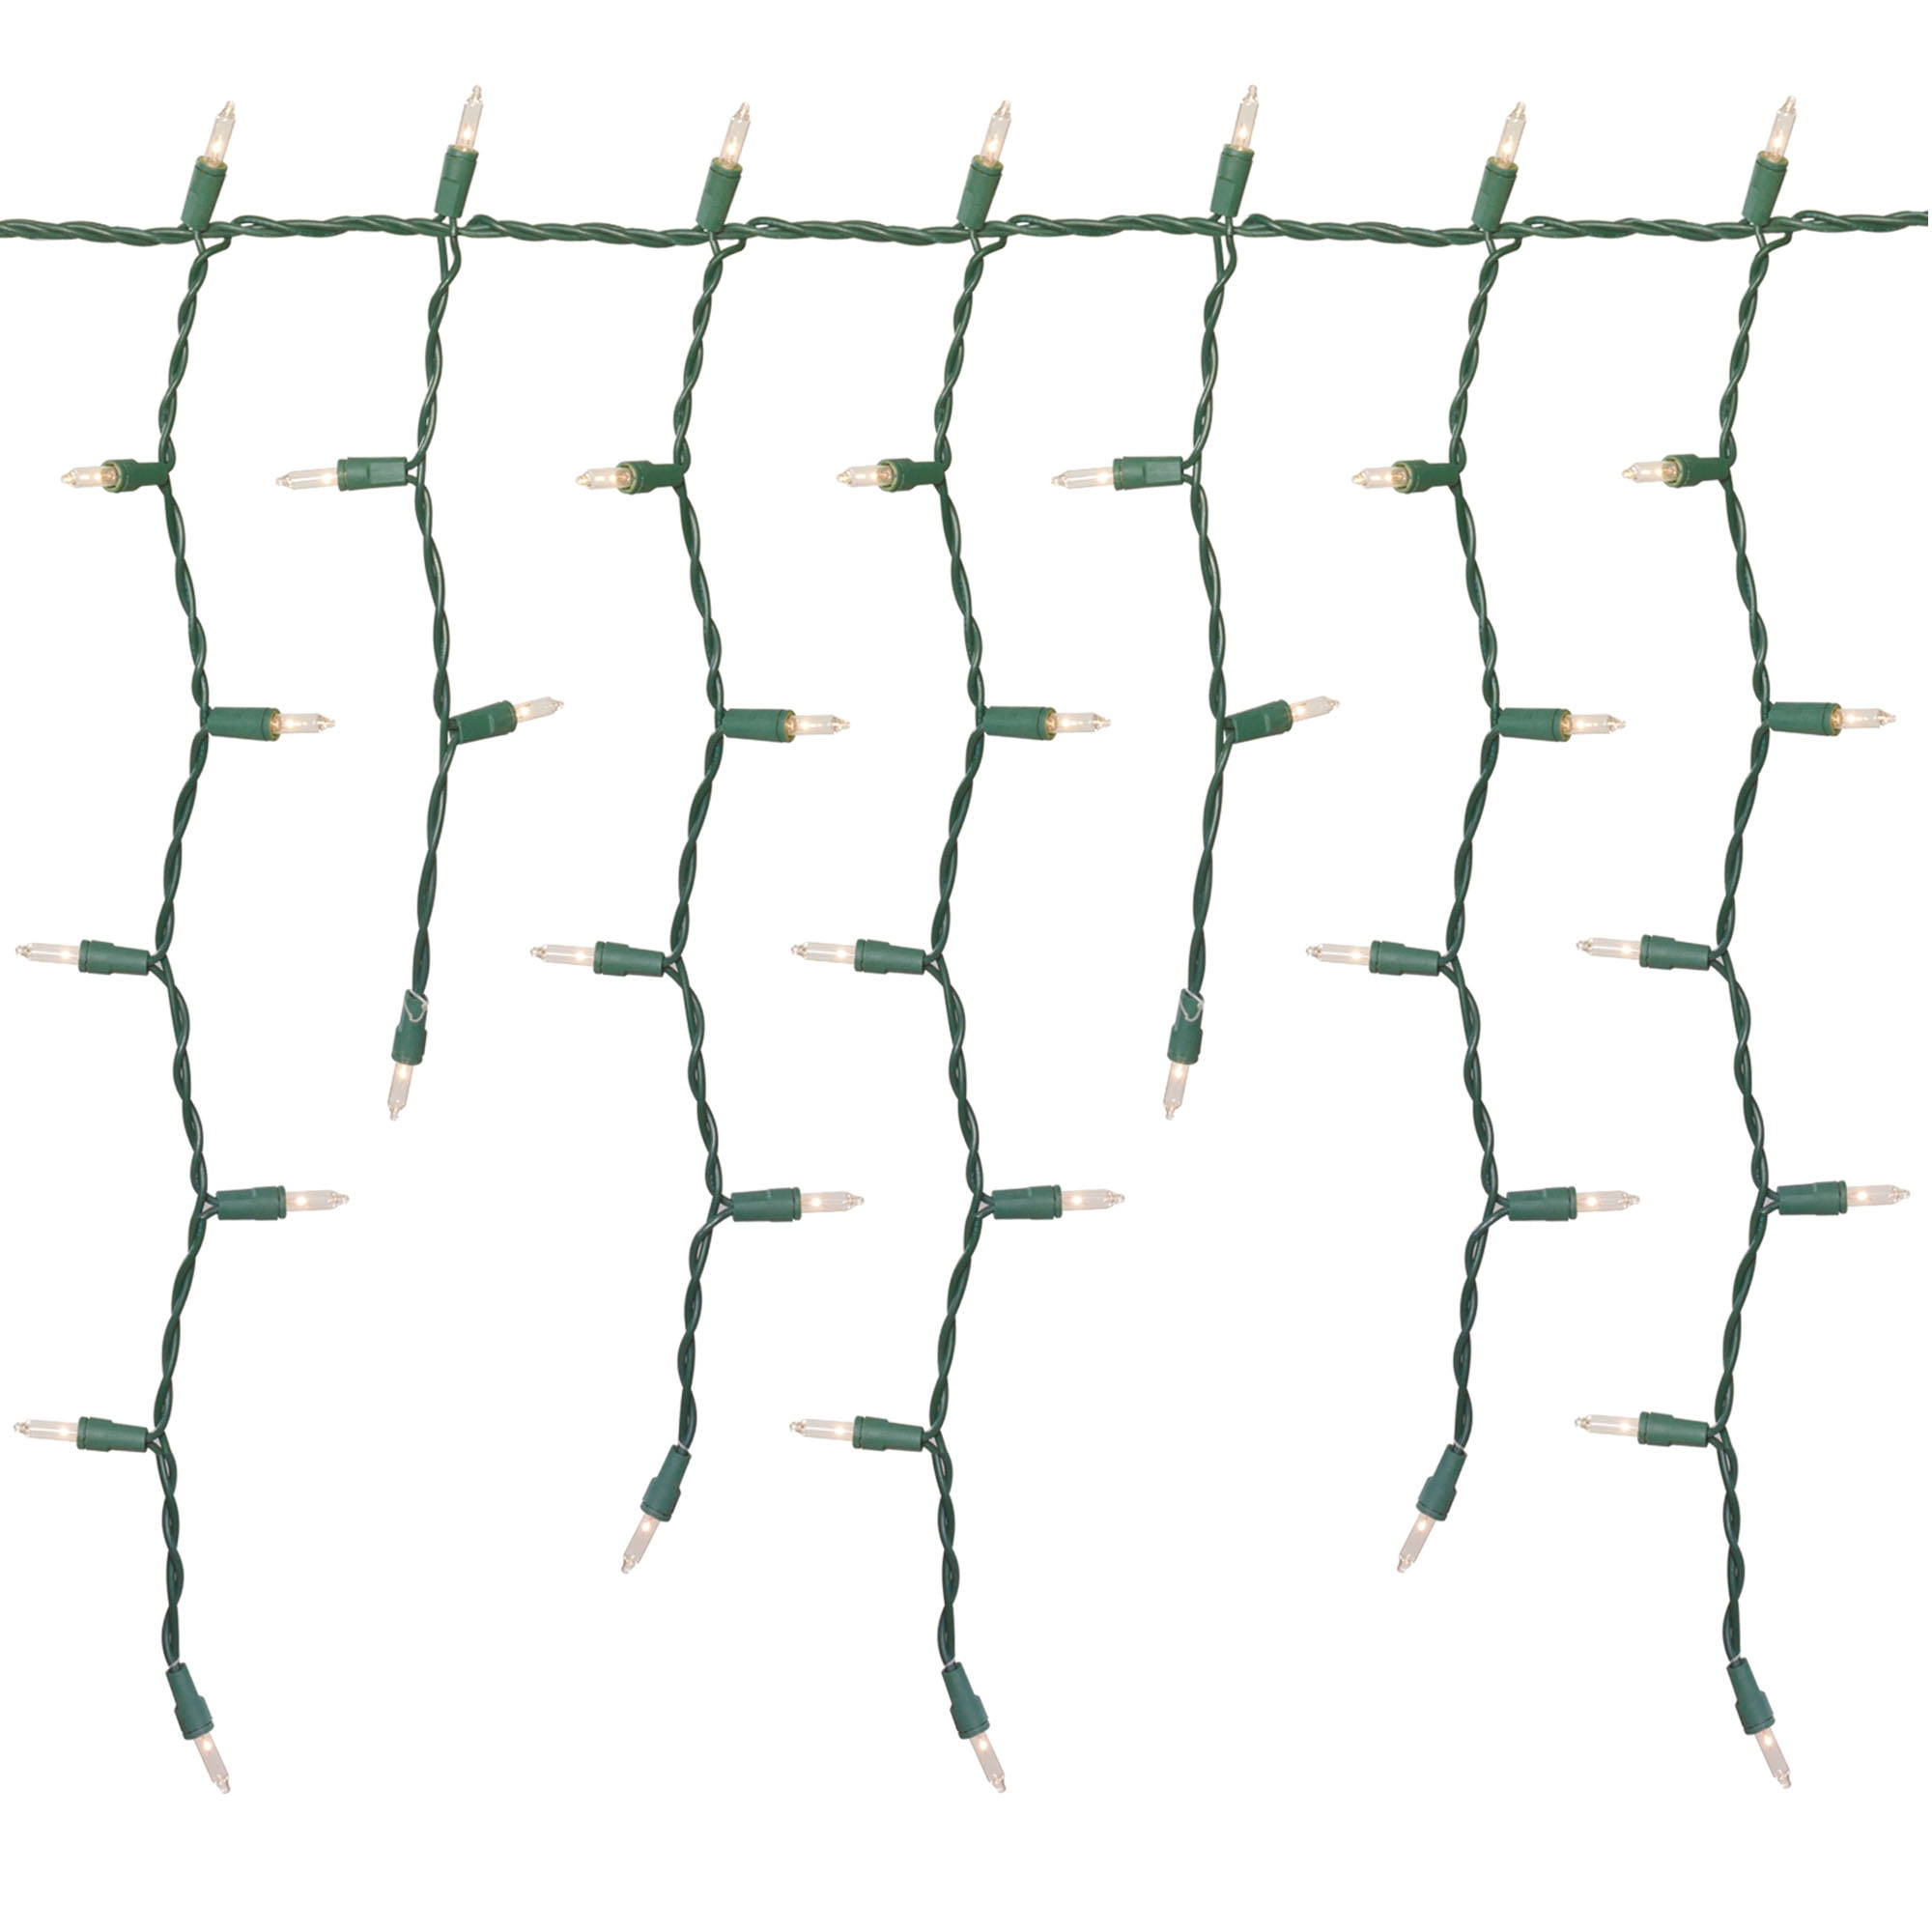 Holiday Time 300-Count Clear Icicle Lights, with Green Wire, 19 Feet